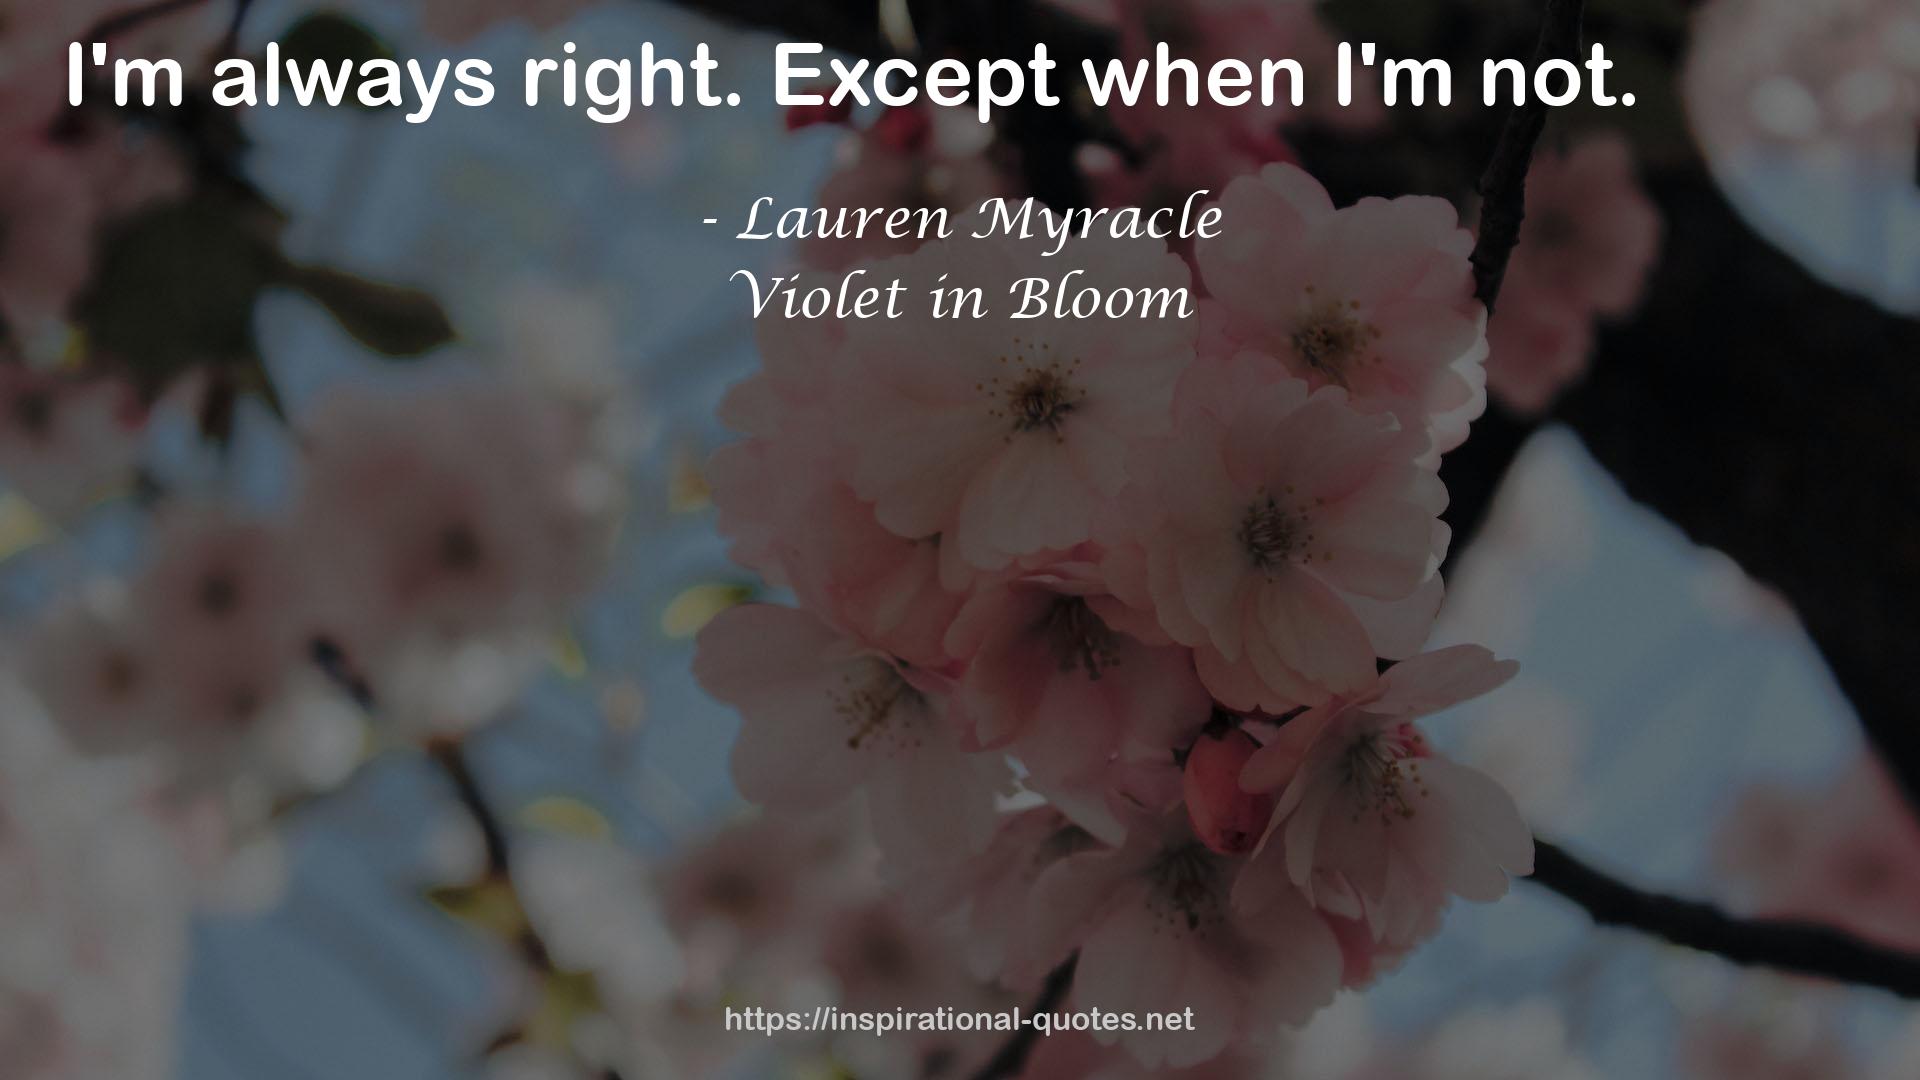 Violet in Bloom QUOTES